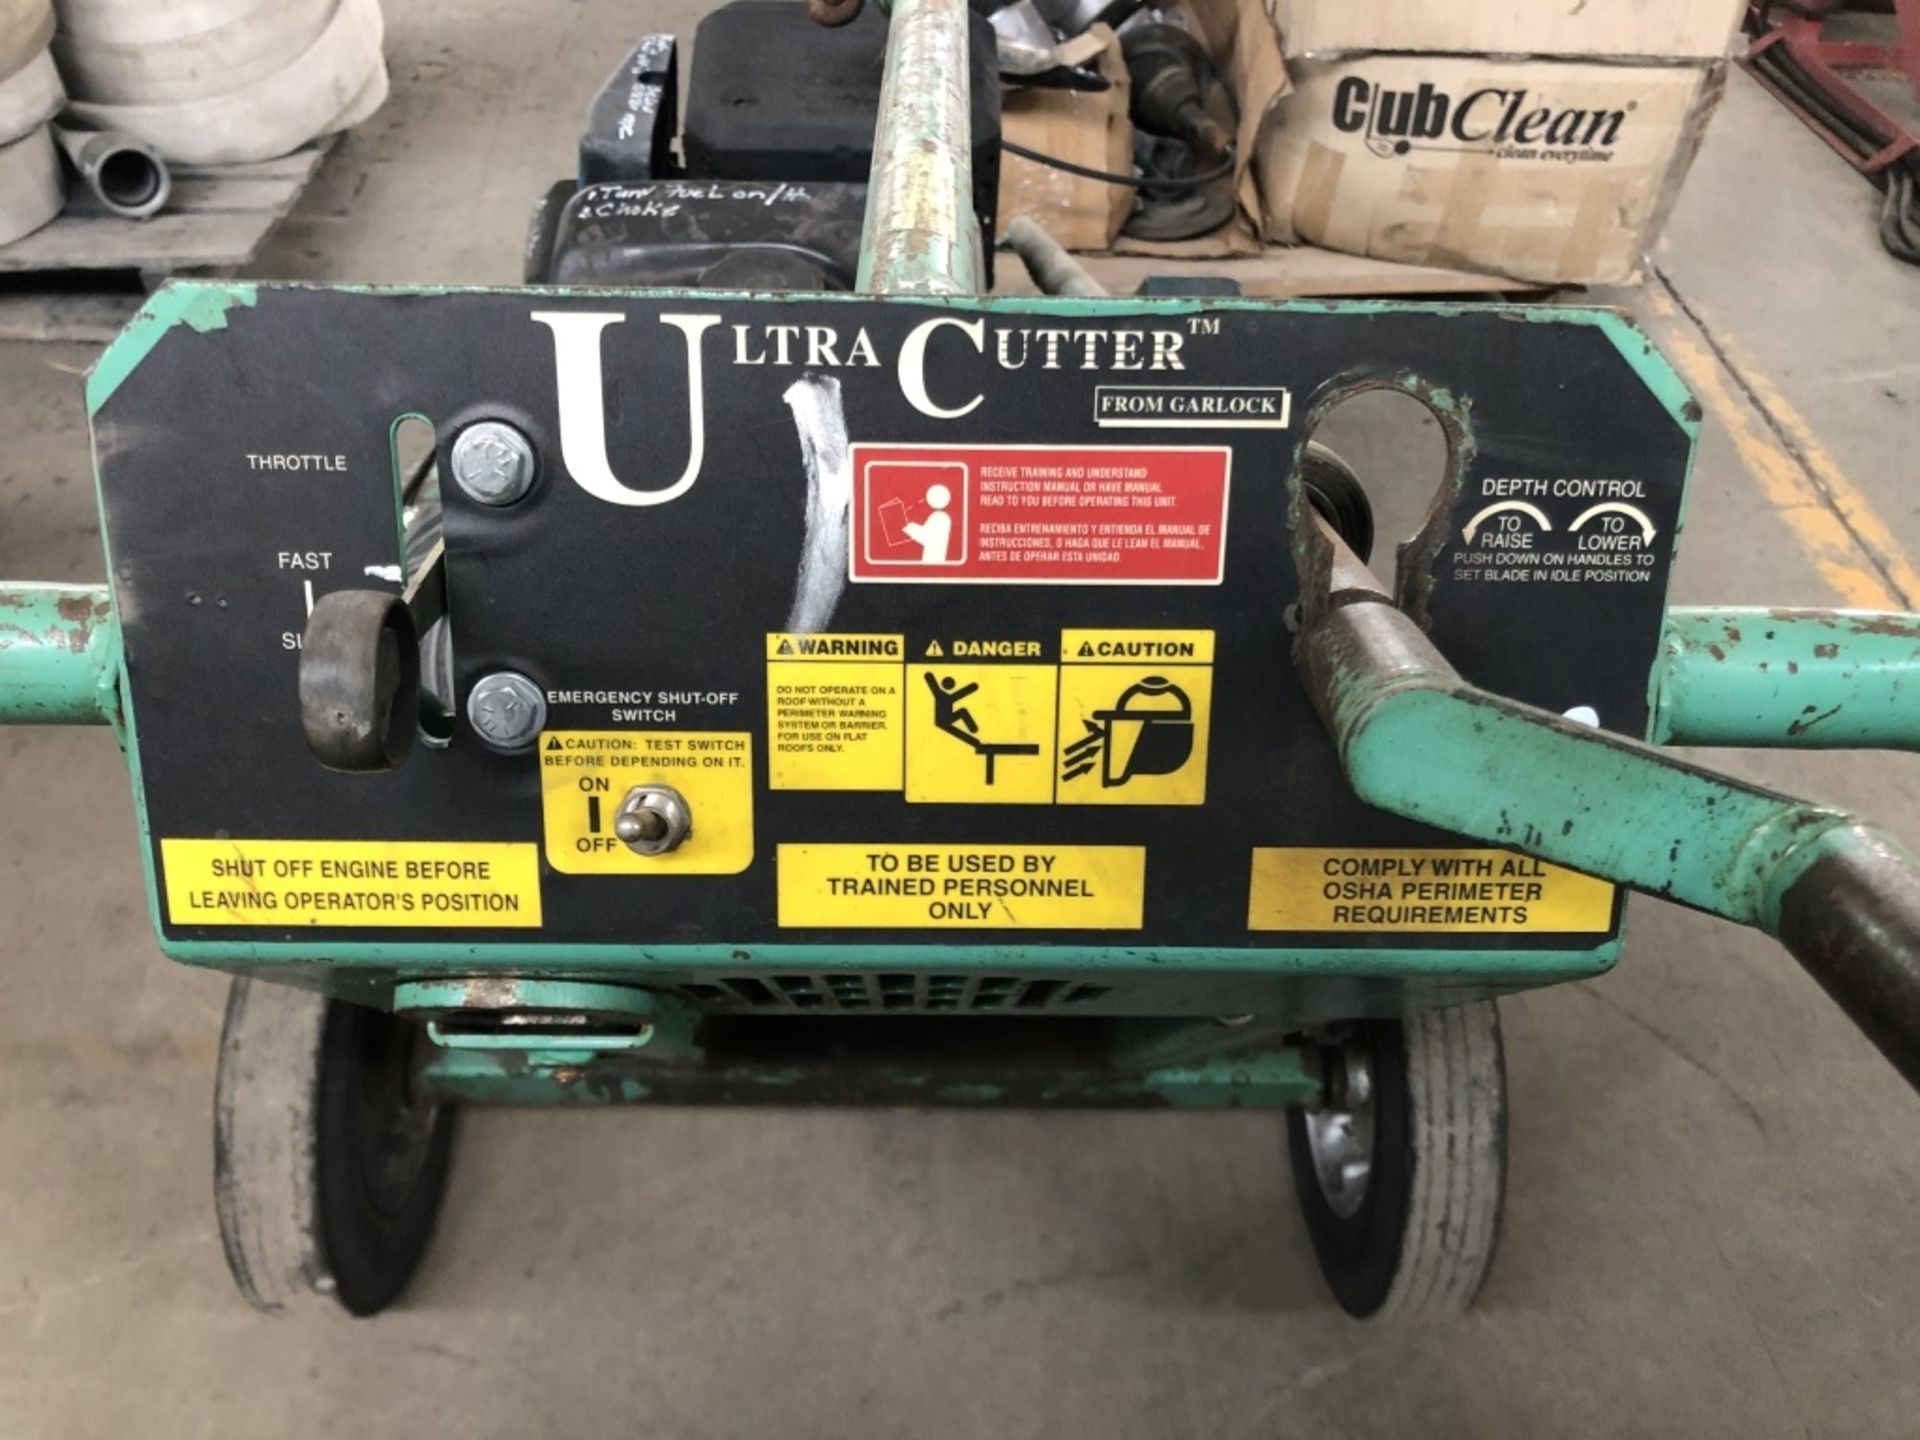 Ultra Cutter Roof Saw - Image 5 of 8